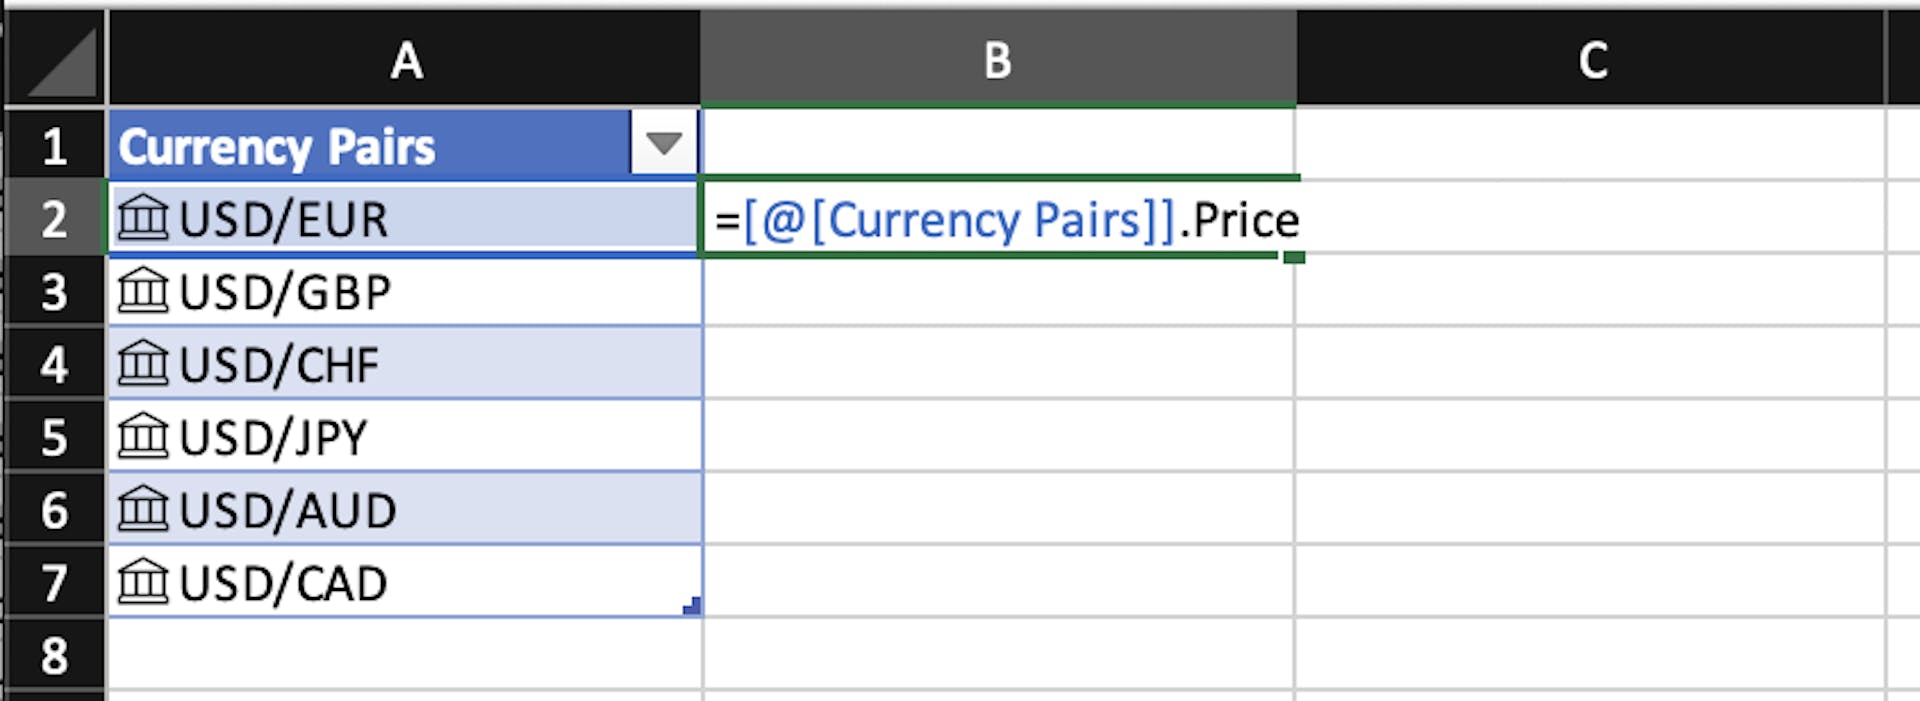 Using the formula to convert currency pairs